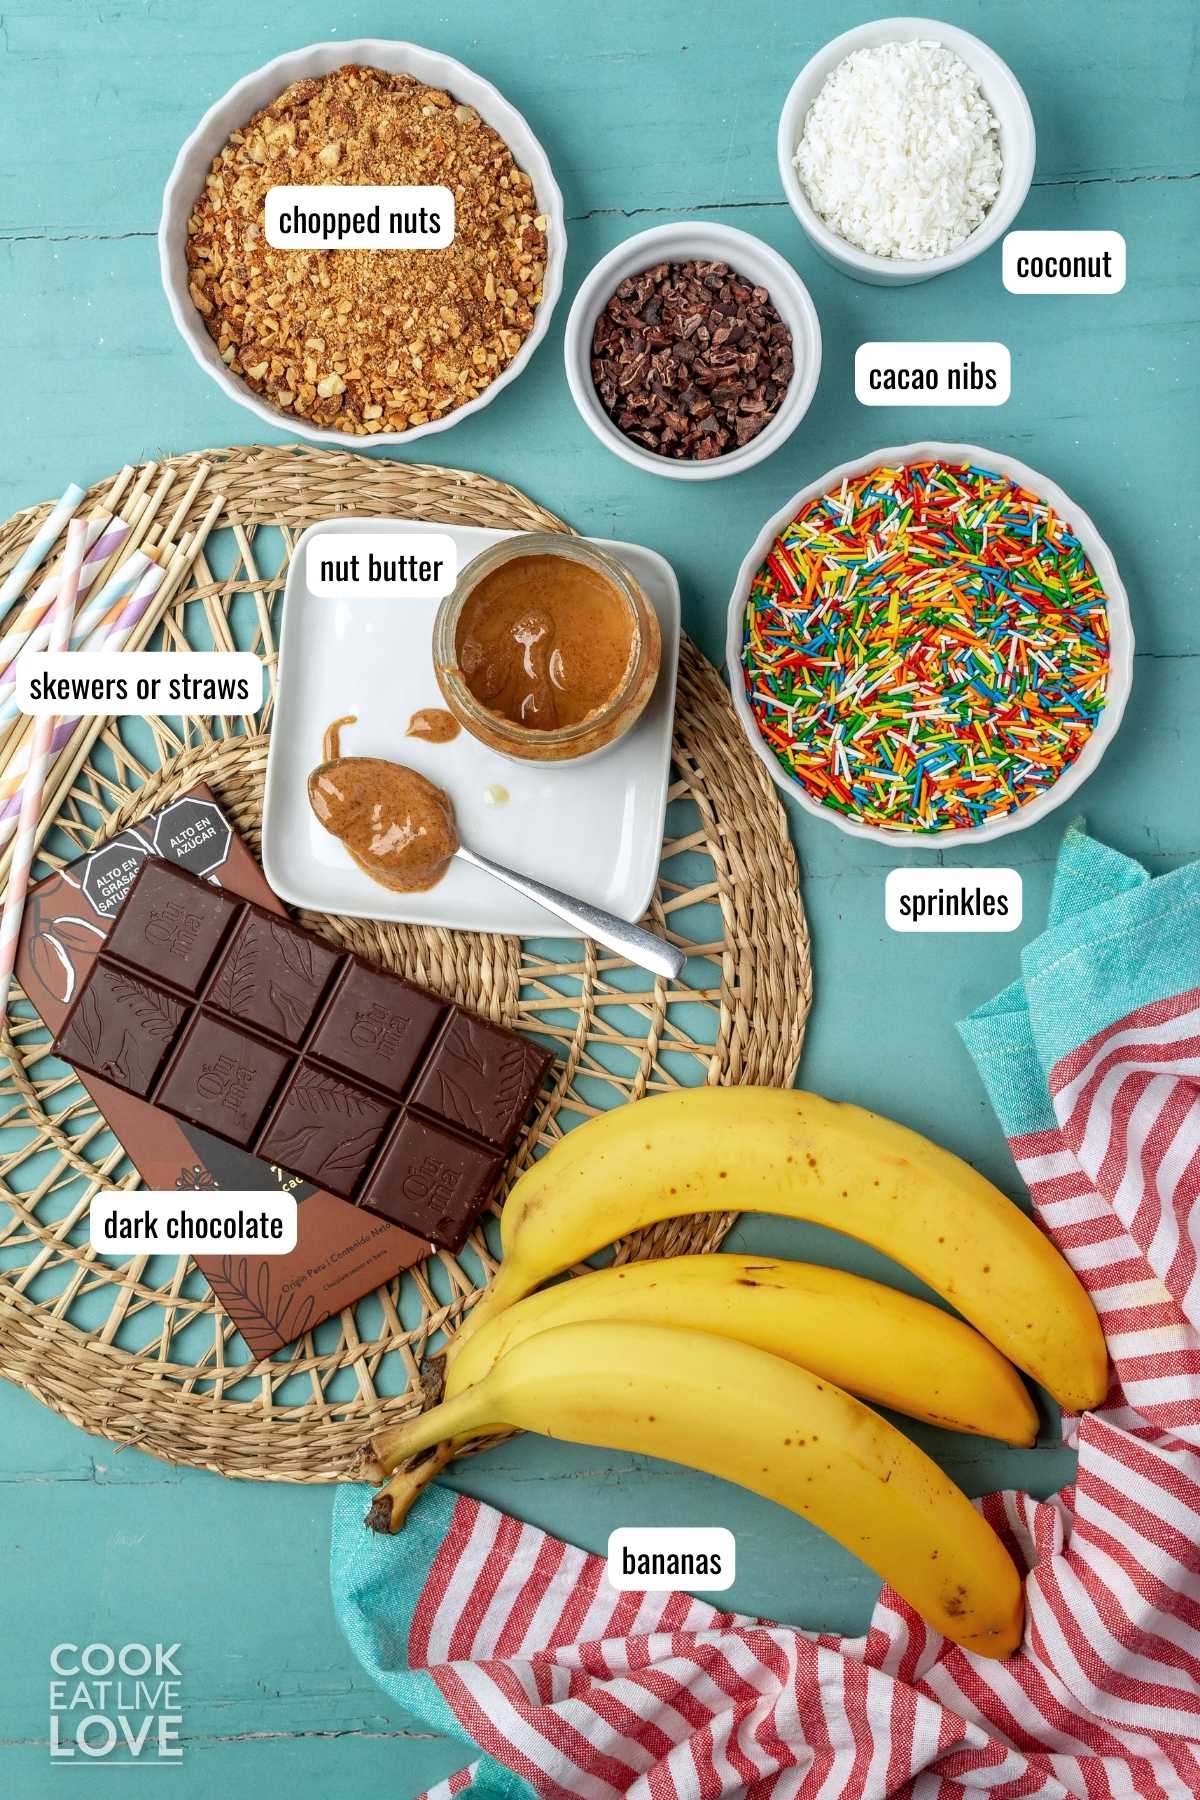 Ingredients to make frozen chocolate banana bites on the table before preparing.